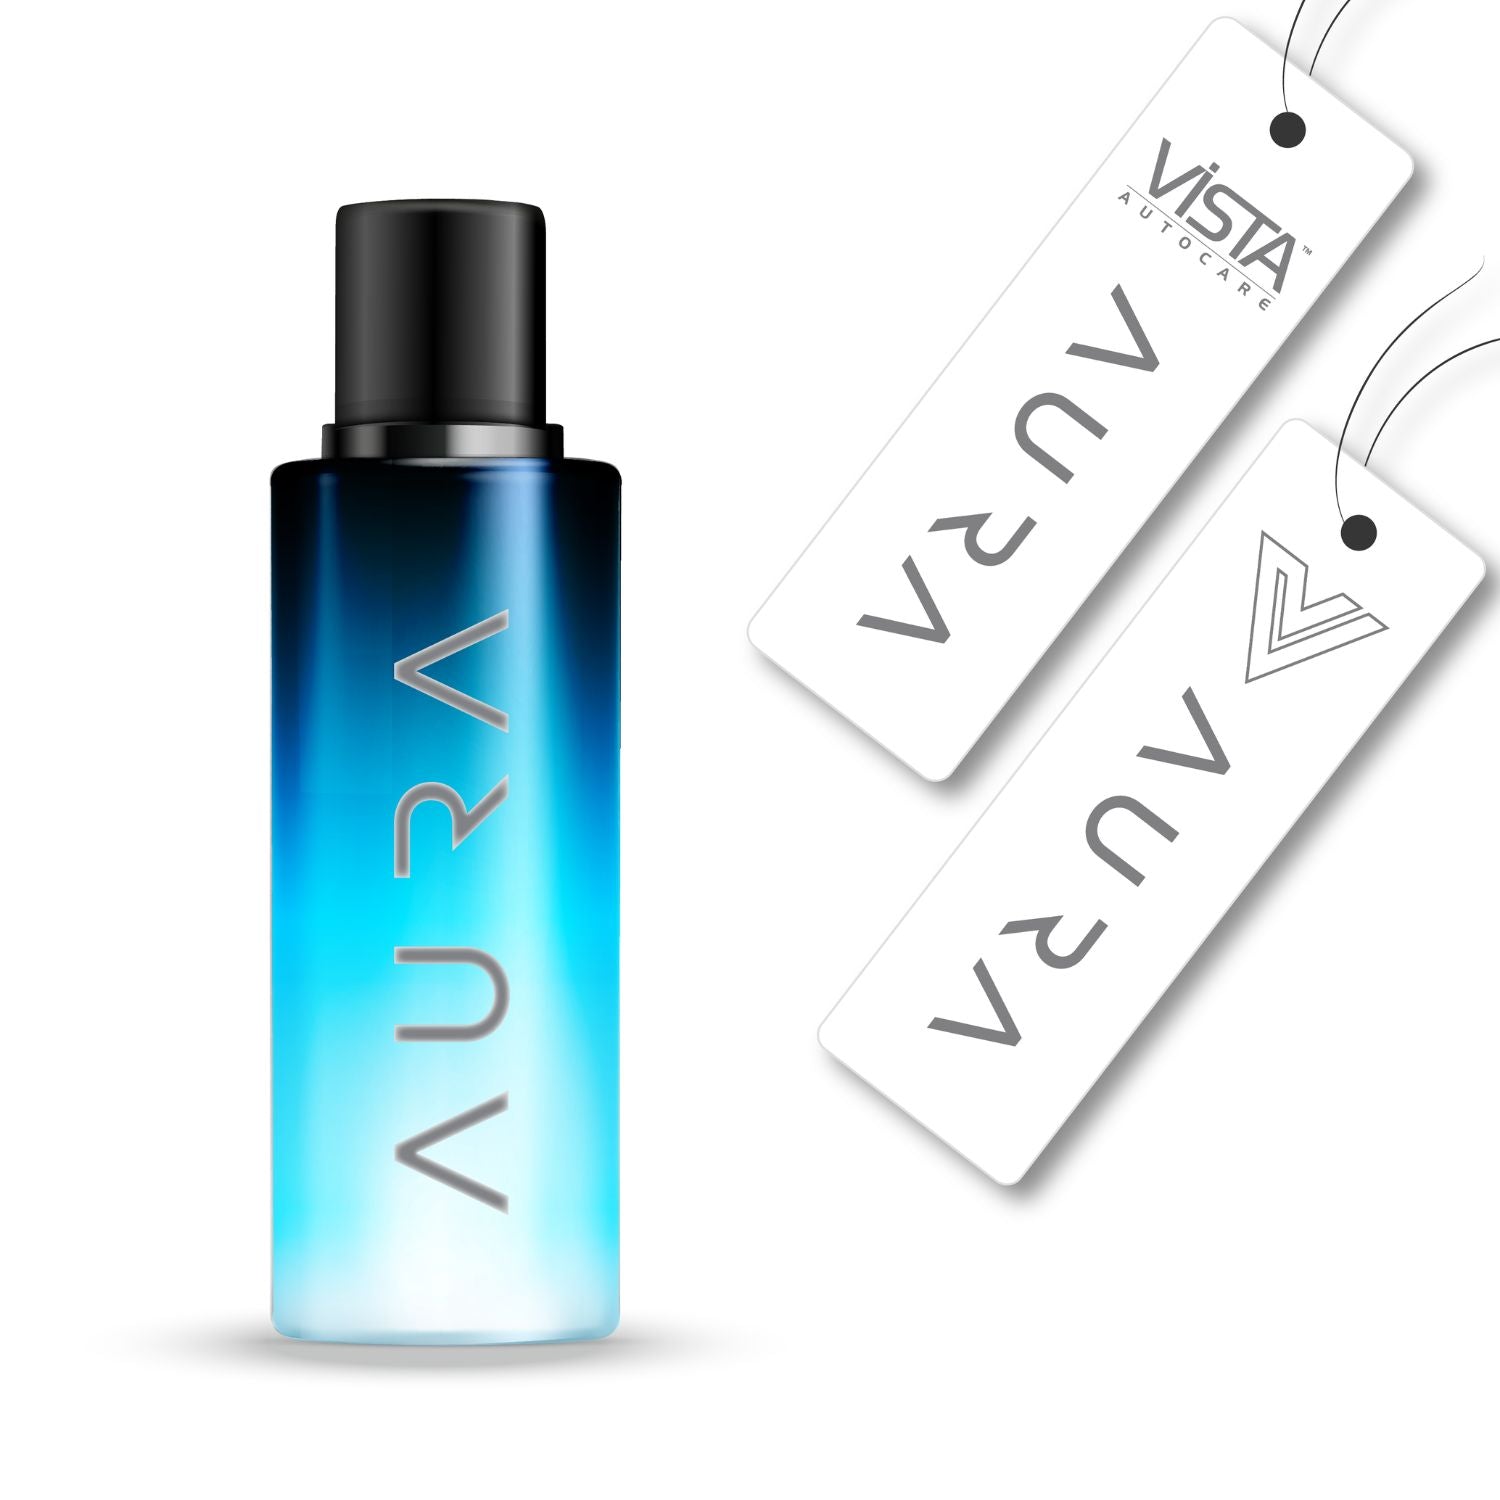 Vista Aura Hanging Air Freshener - Lagoon 30 ml with 2 Hanging Boards | For Home,  Living Spaces, Office,  Cars, Closets, Bathrooms | 400 + Sprays